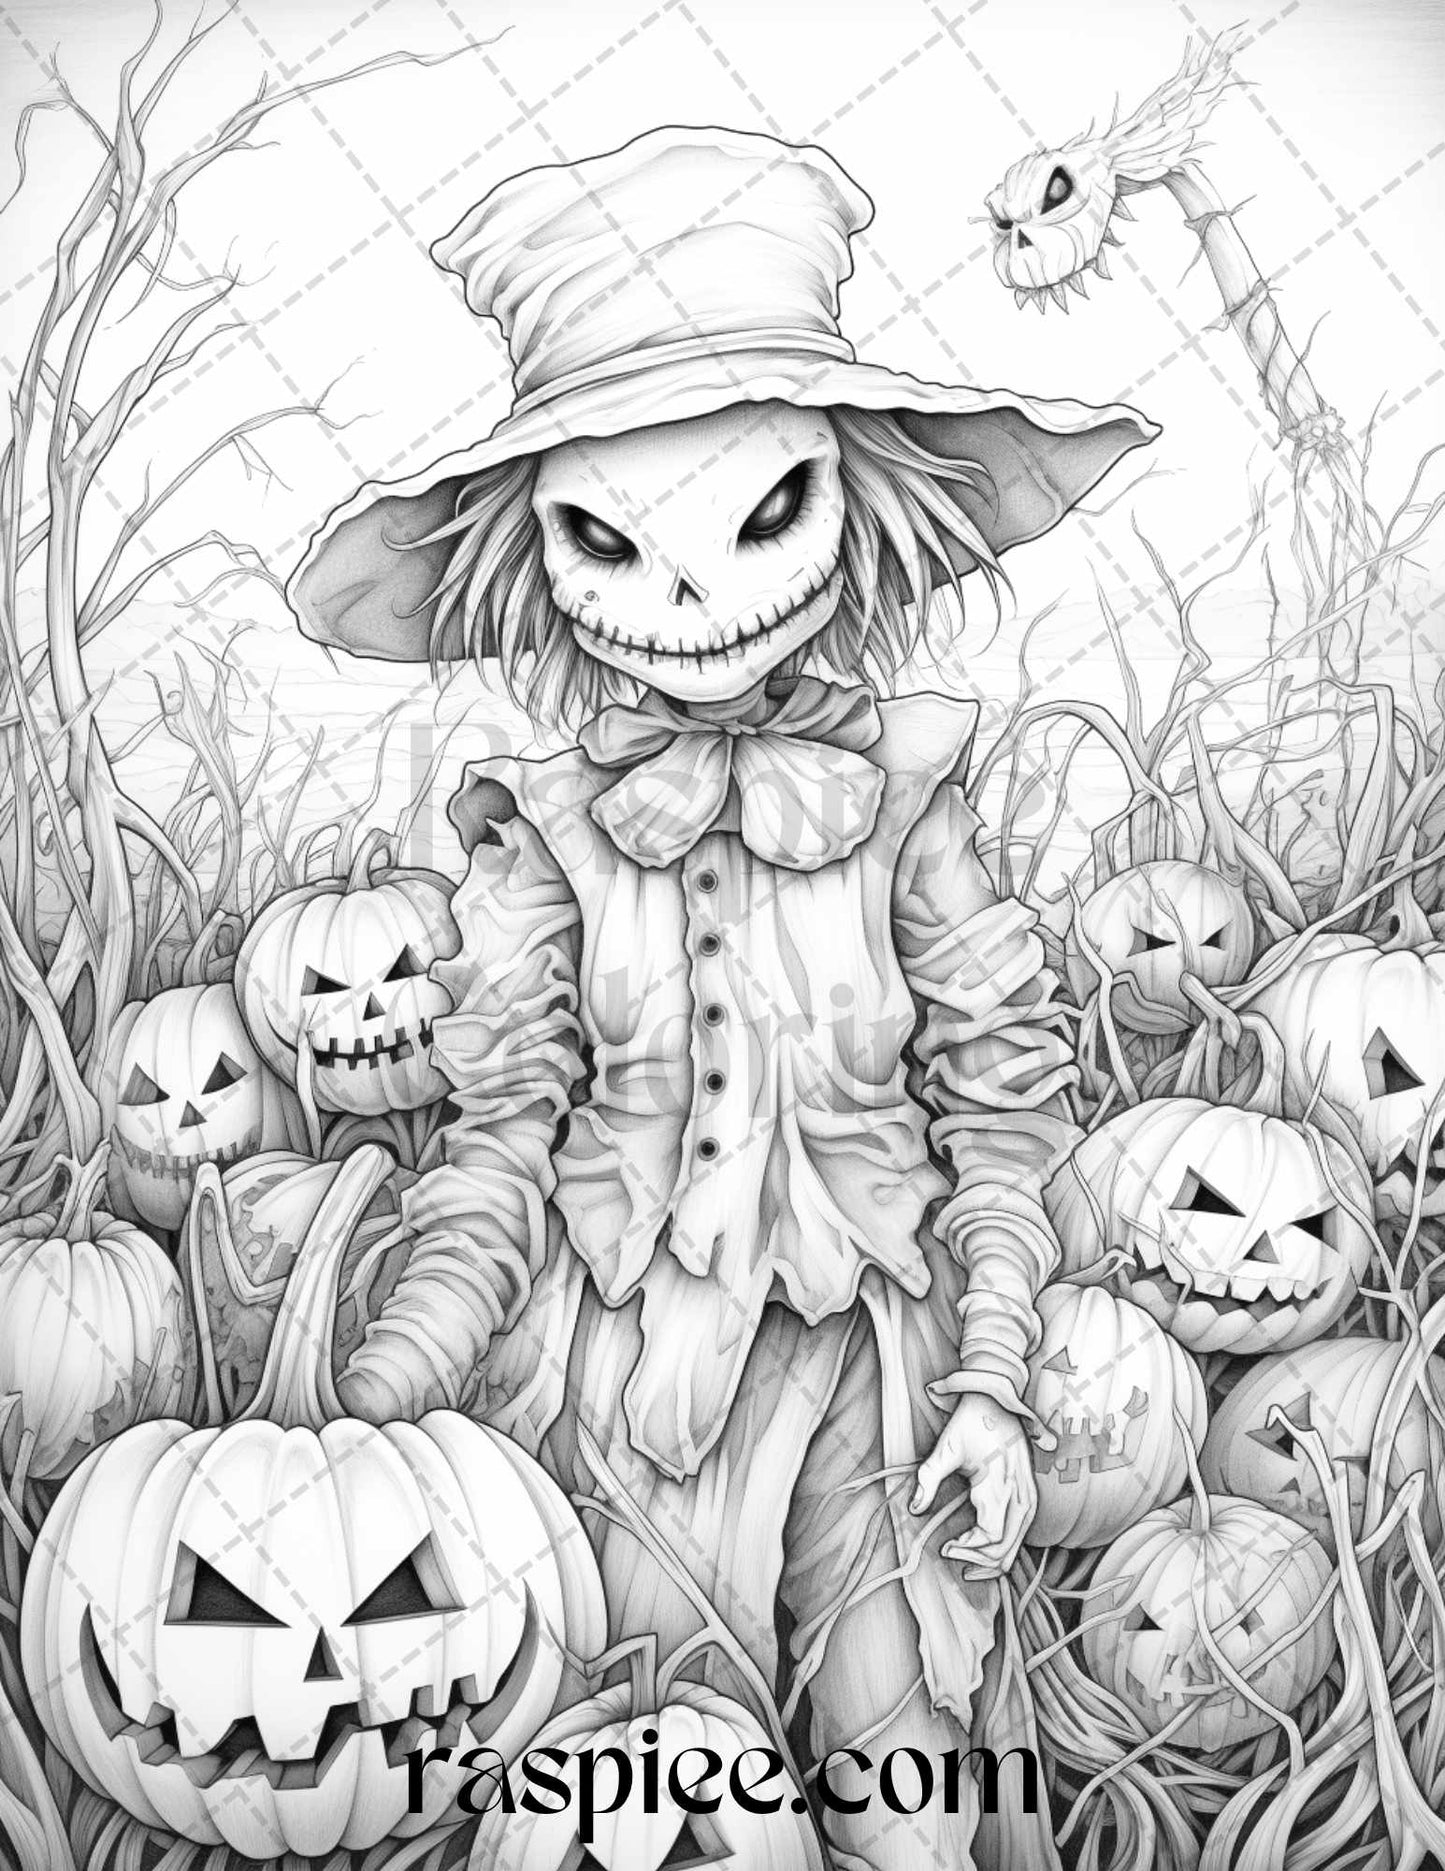 50 Halloween Scarecrows Grayscale Coloring Pages Printable for Adults, PDF File Instant Download